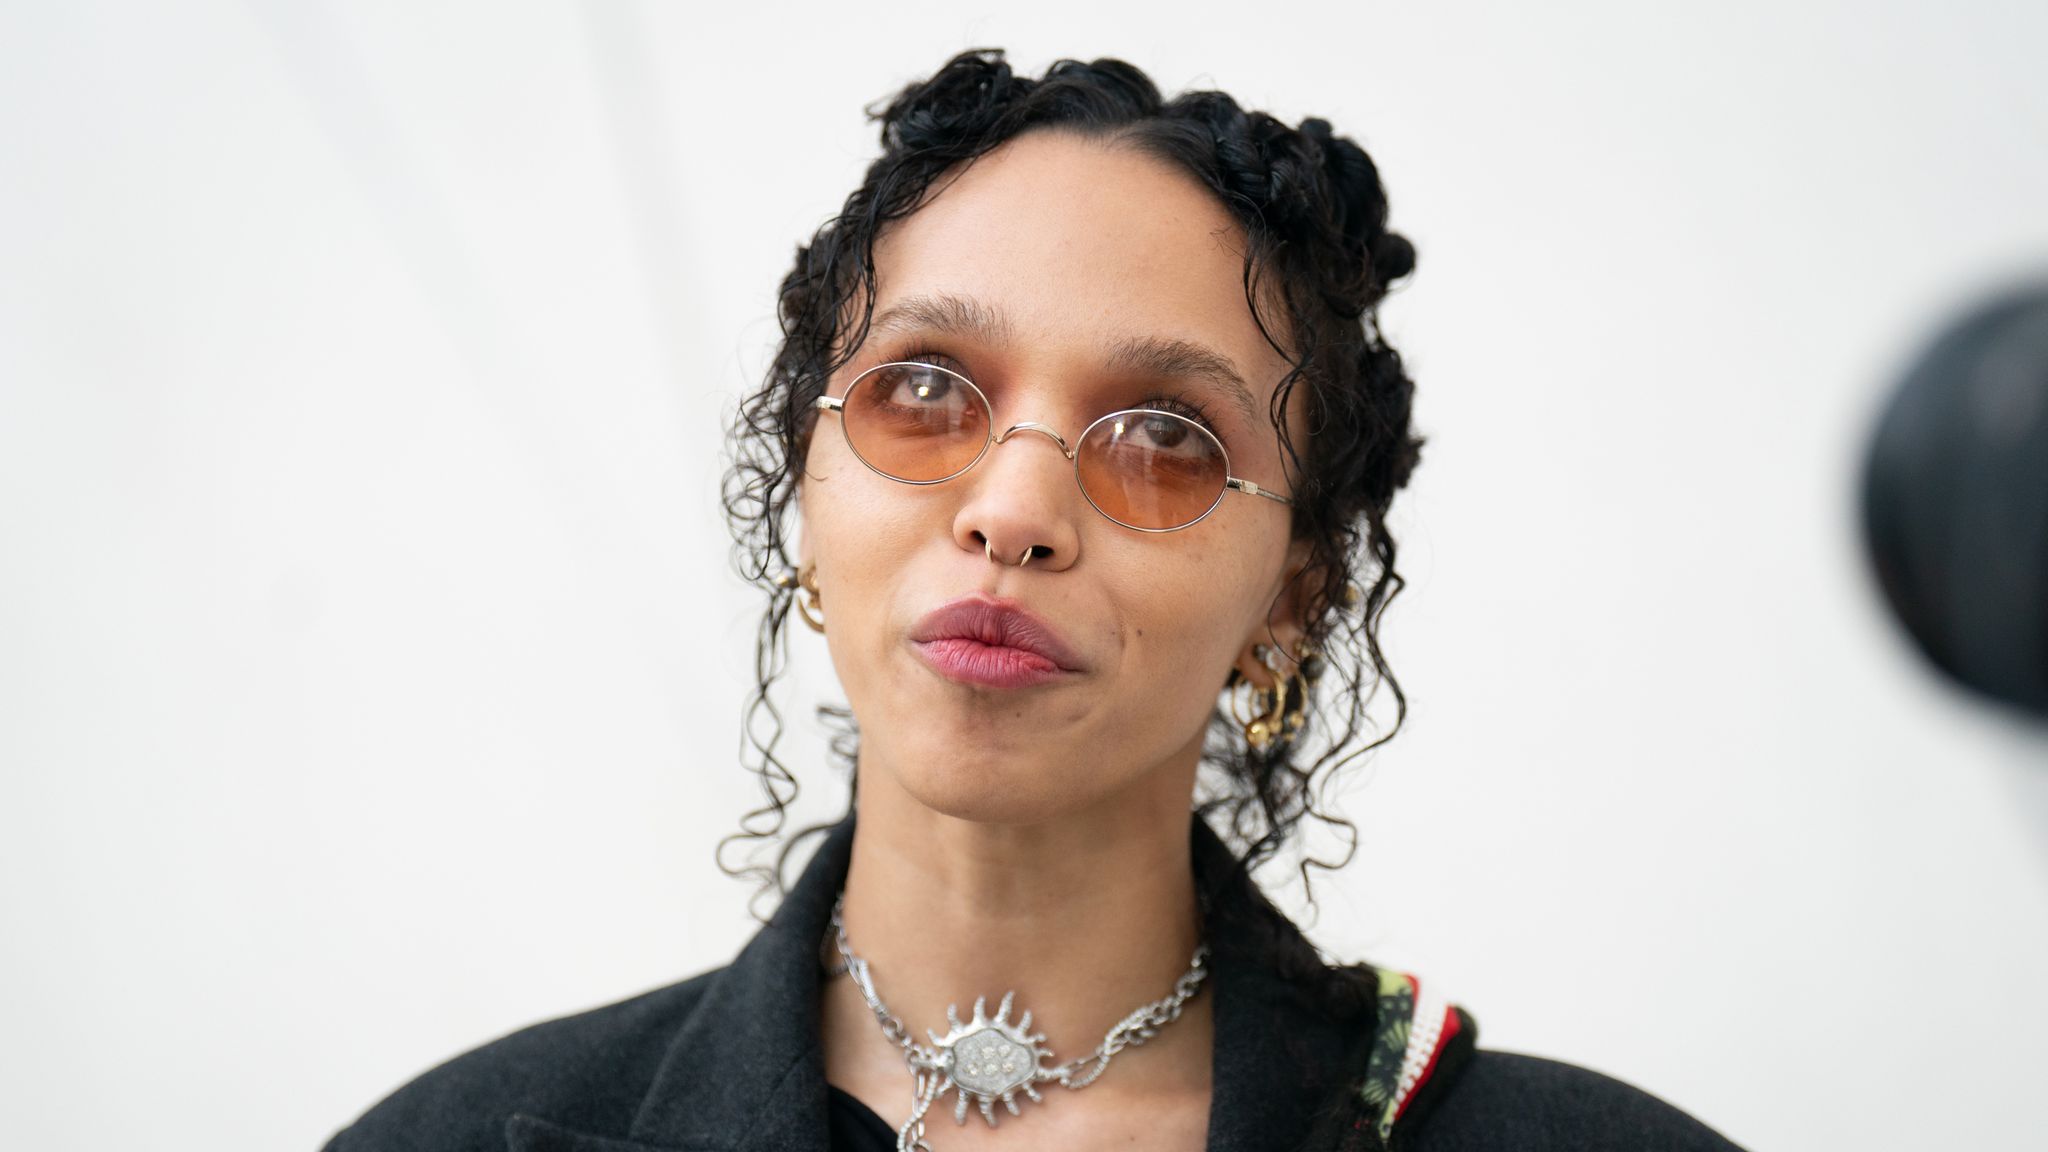 Calvin Klein ad featuring FKA twigs banned over complaints it objectified  women, Ents & Arts News